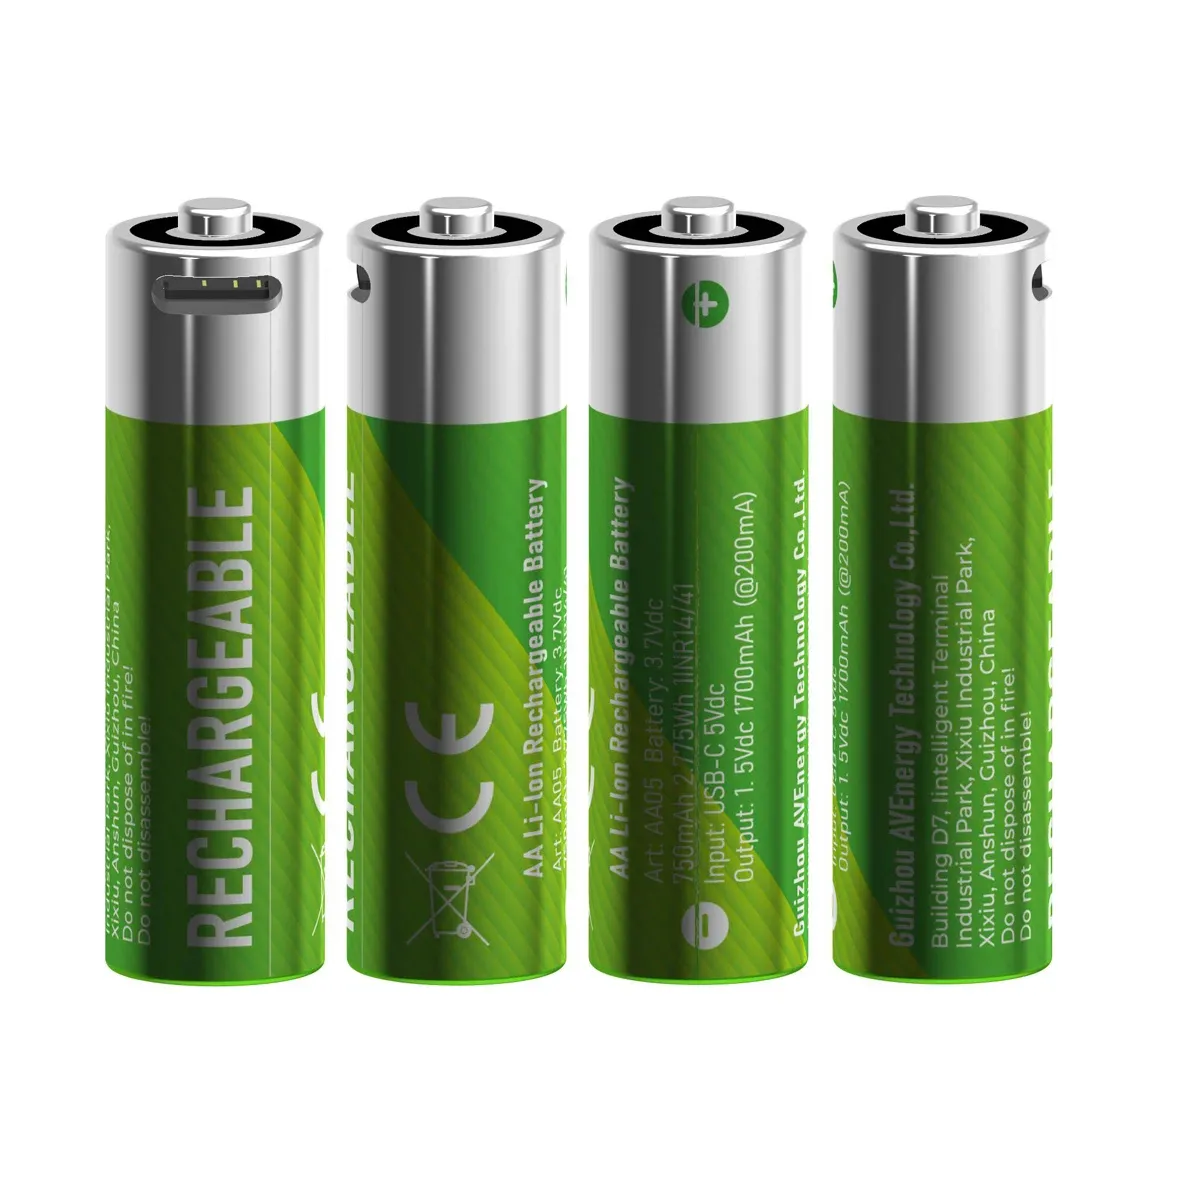 Factory Price OEM one pack with 4 batteries type c charge battery AA 1.5V 2550mWh Lithium ion USB Rechargeable Batteries